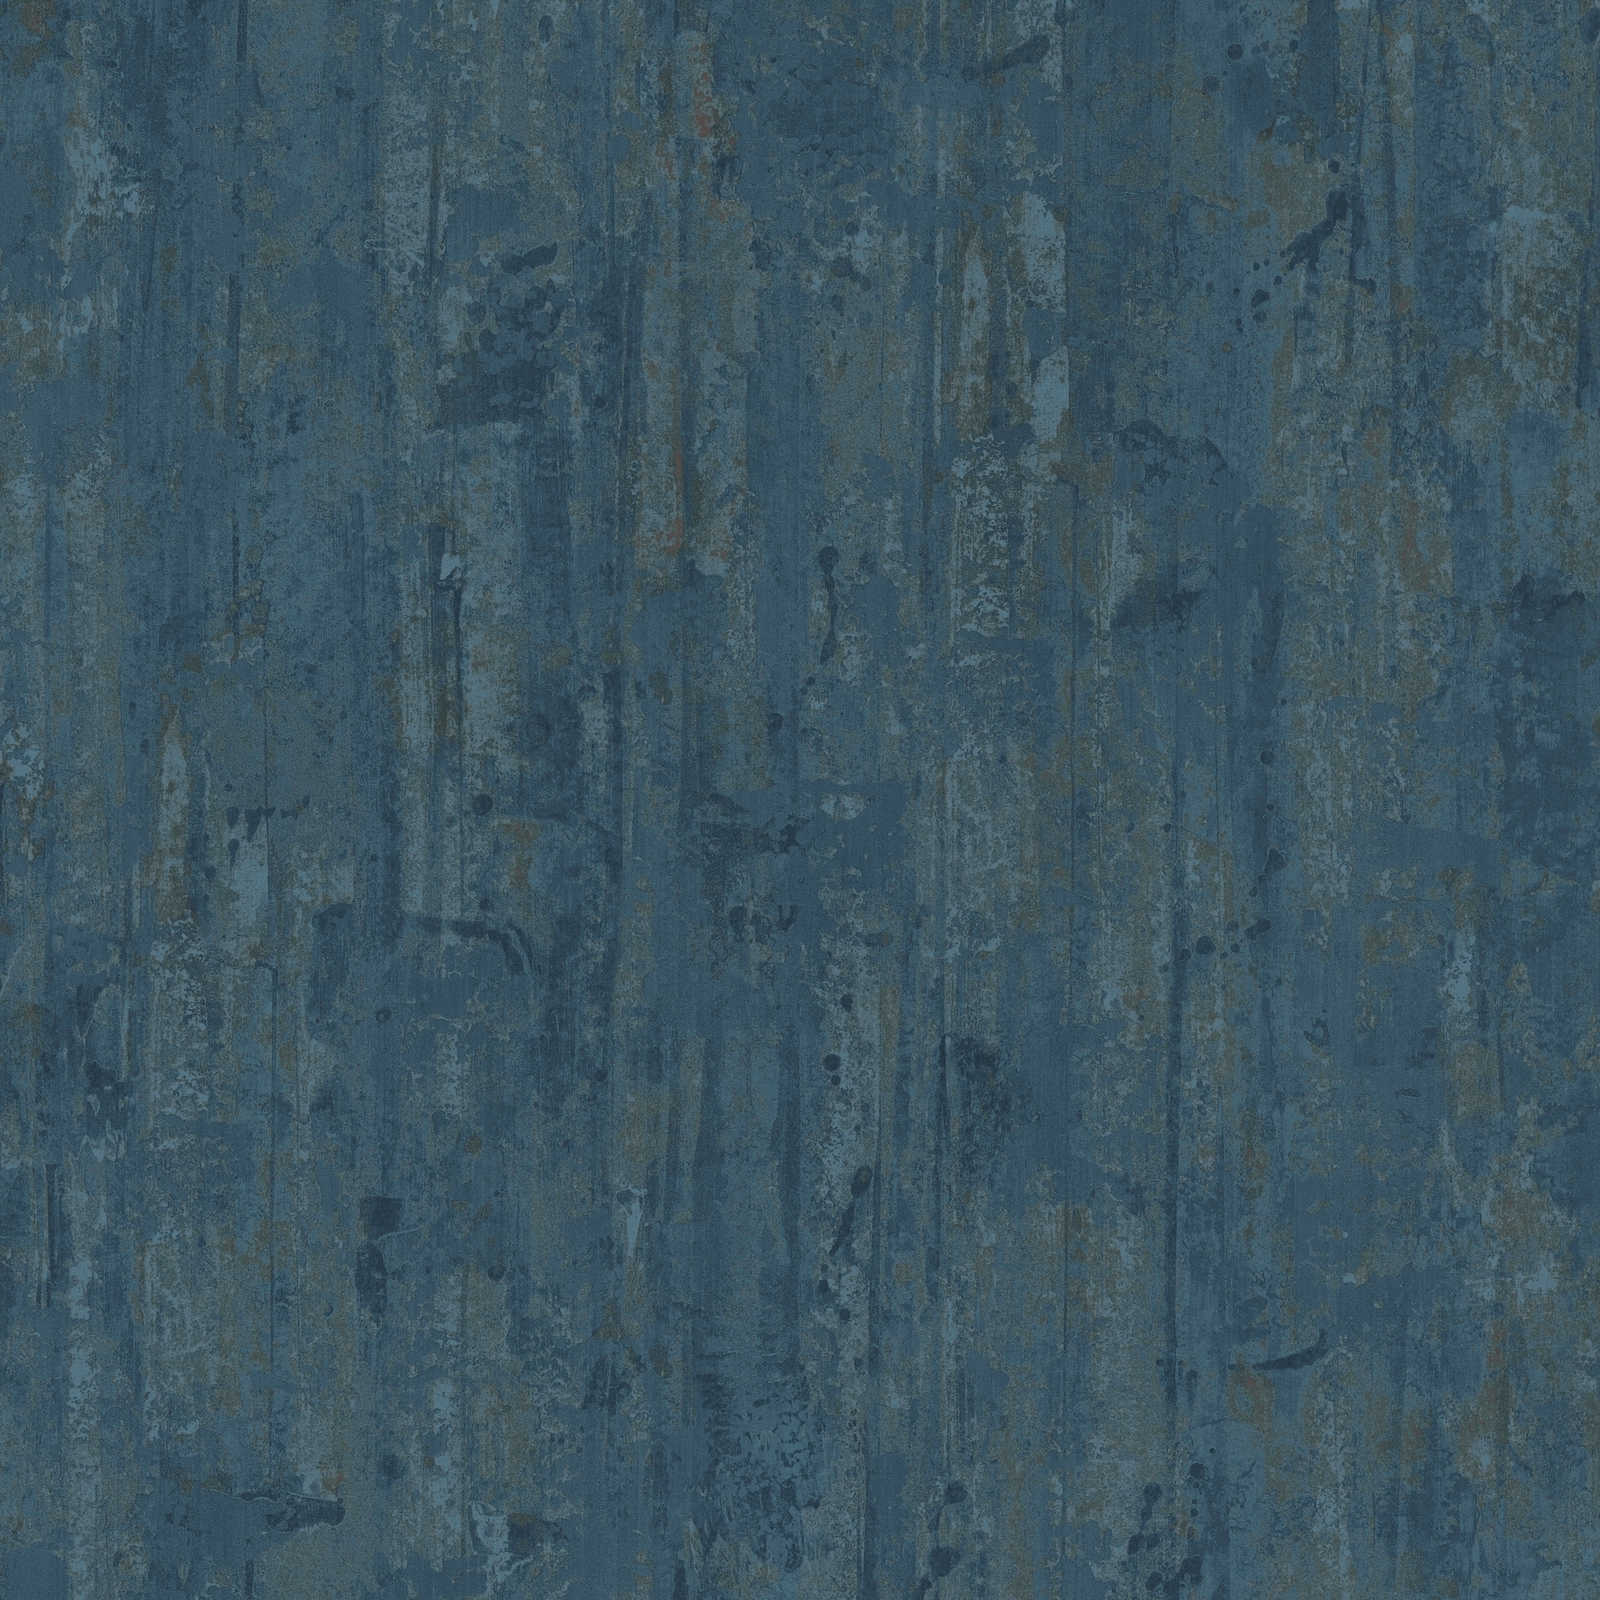 Ethno wallpaper with textured pattern in wood look - blue
